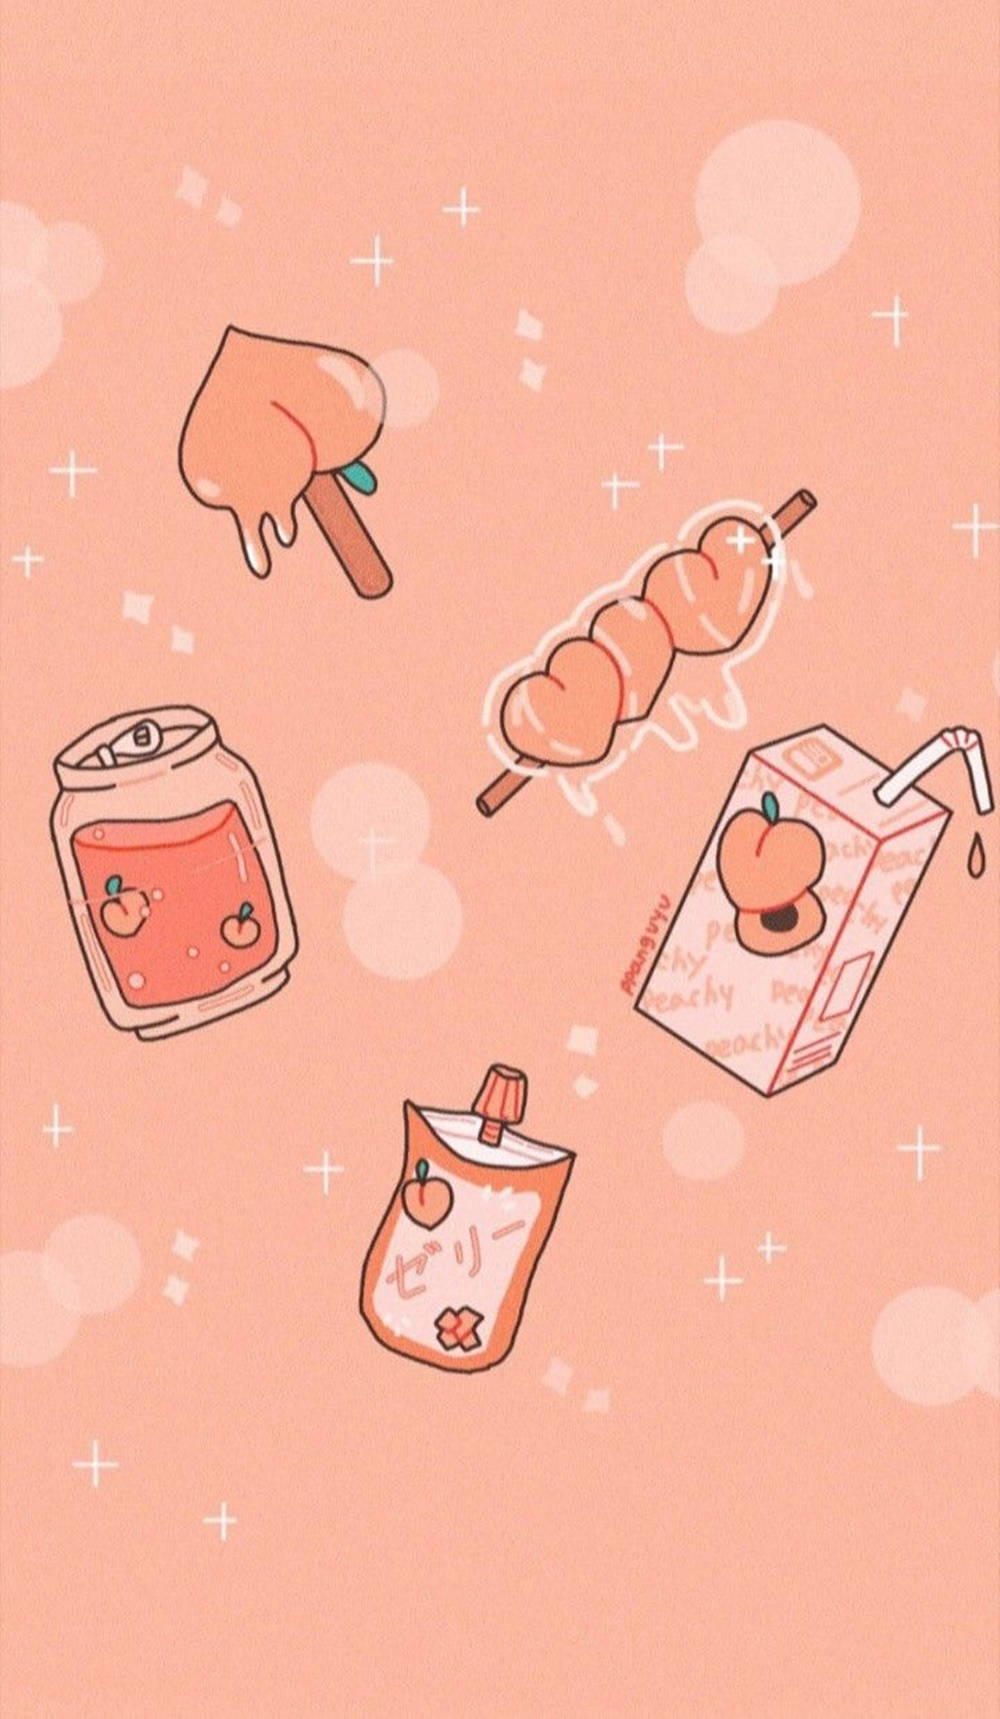 Show Off Your Kawaii Side With This Cute Pink Aesthetic Wallpaper! Background